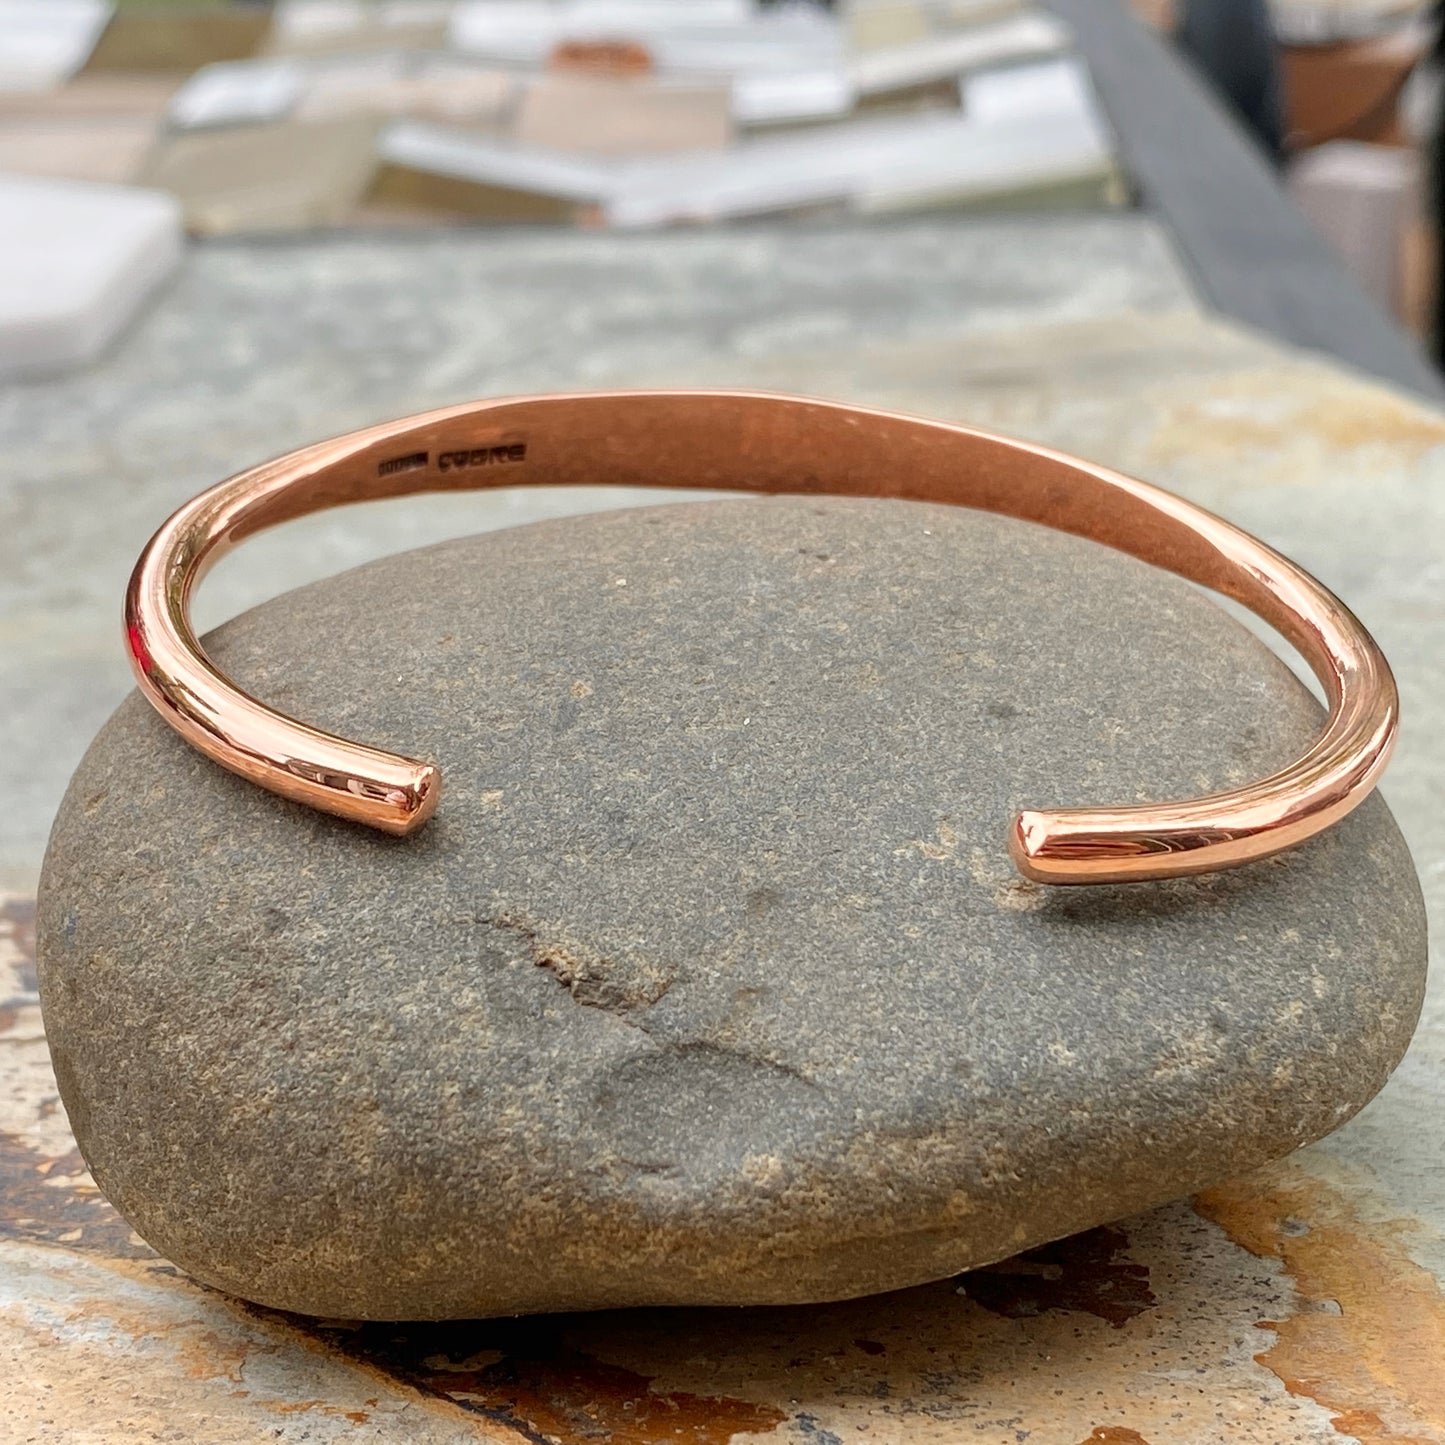 Copper Hammered Tapered Cuff Bangle Bracelet 6.6mm, Copper Hammered Tapered Cuff Bangle Bracelet 6.6mm - Legacy Saint Jewelry